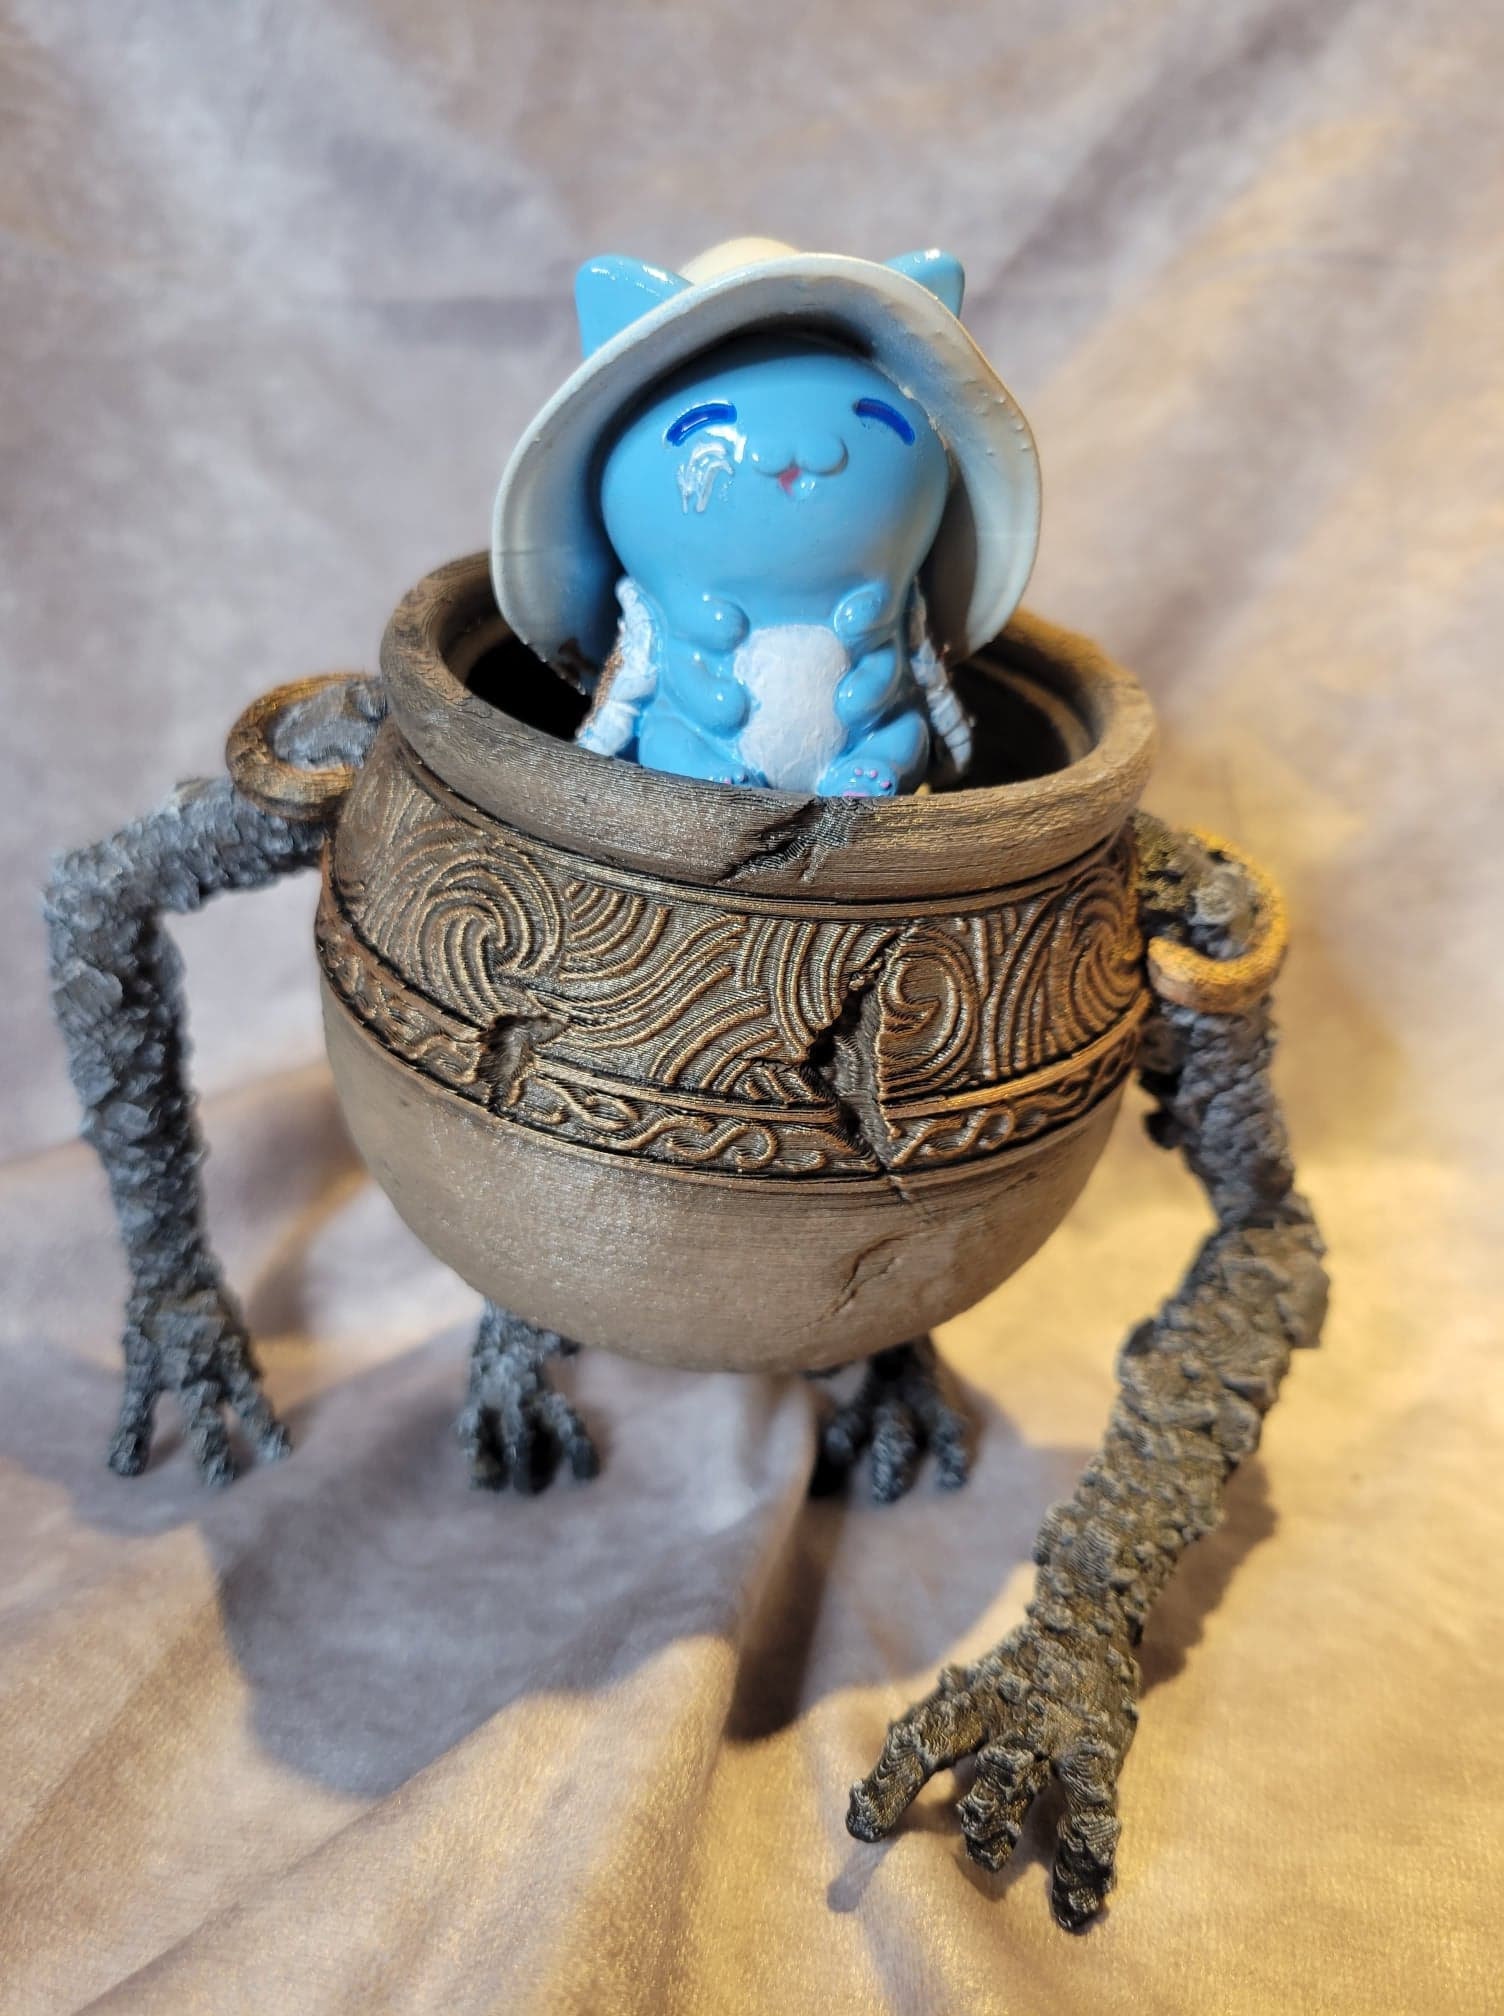 Elden Ring Ranni the Witch as an Adorable Cat Figurine 